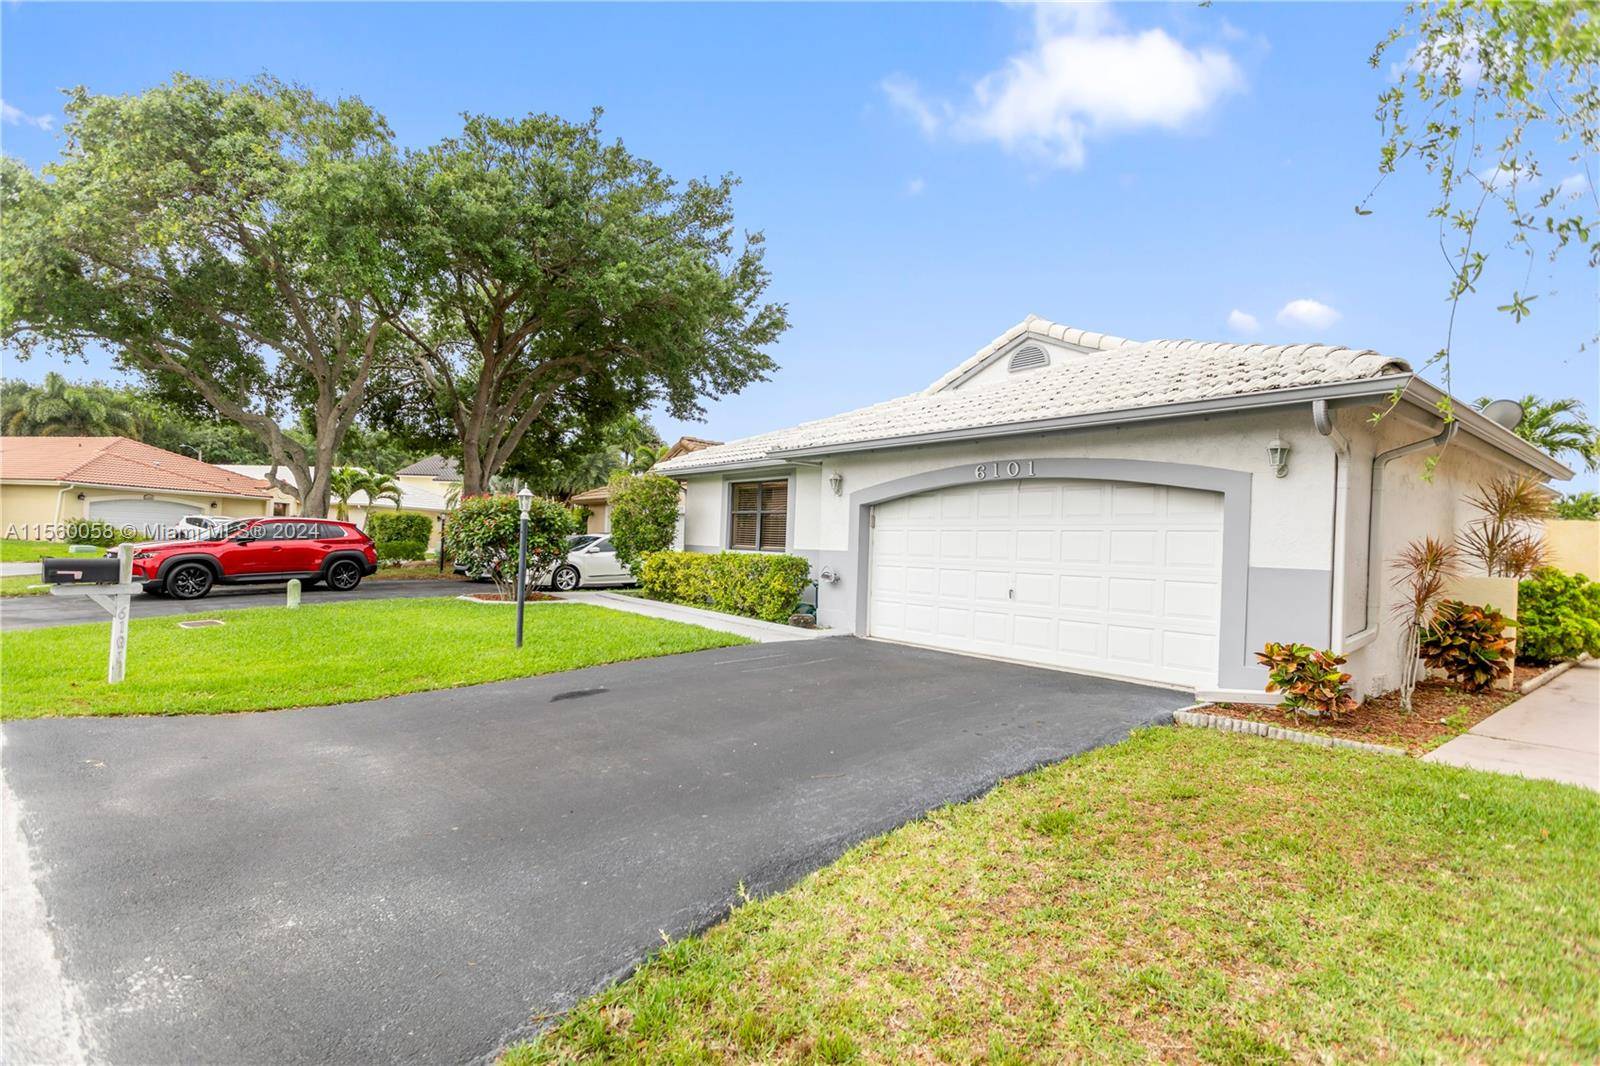 This meticulously maintained home offers 3 spacious bedrooms, 2 elegantly renovated bathrooms, tile throughout the main areas and laminate flooring in the bedrooms, large common areas, lots of closet space ...